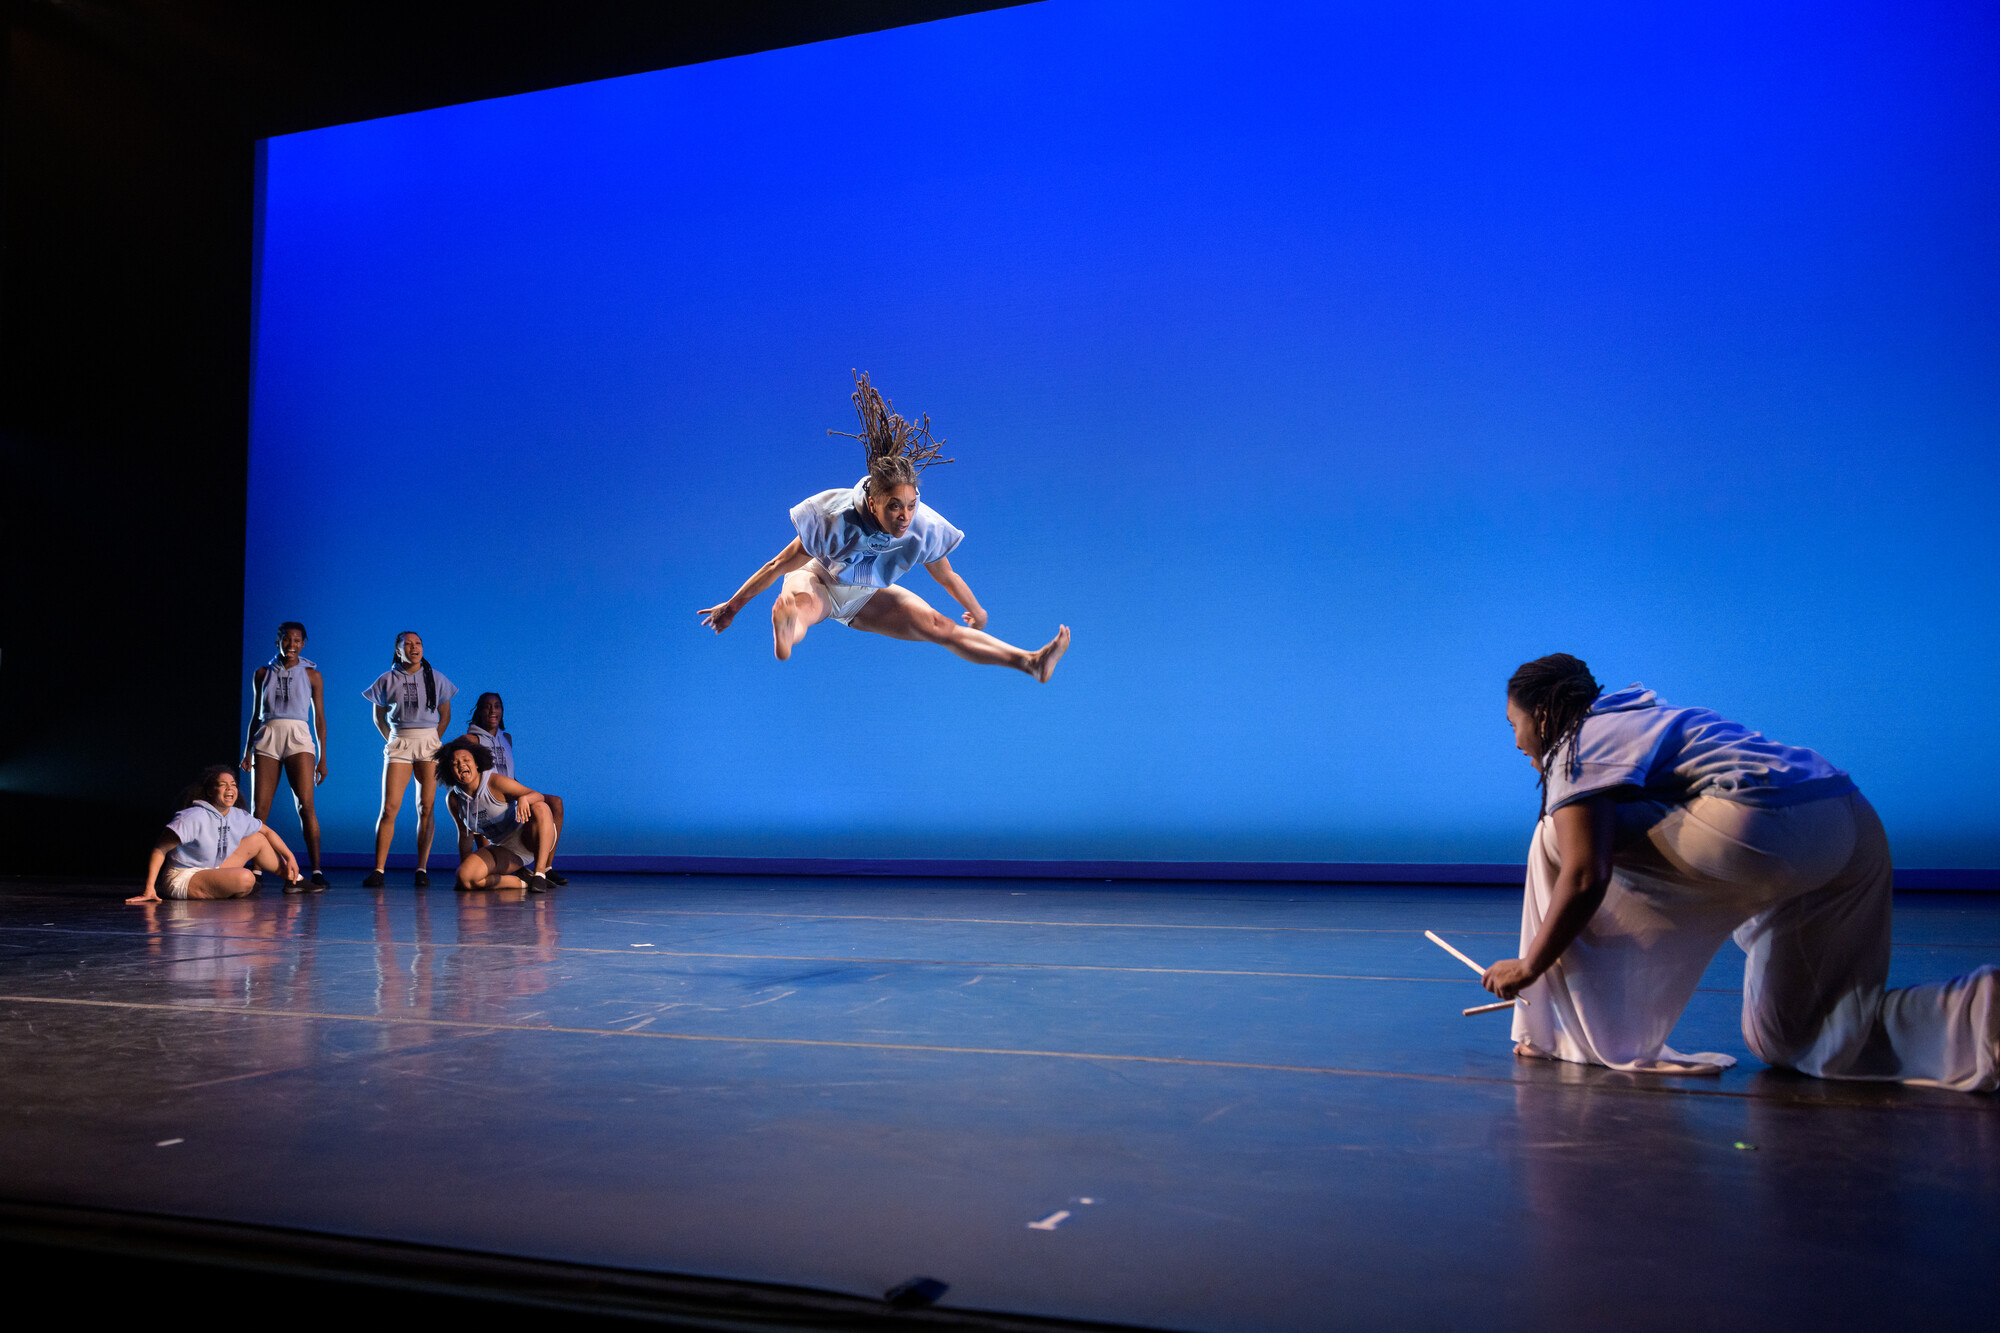 Four performers sit around a dancer jumping in front of a blue background.